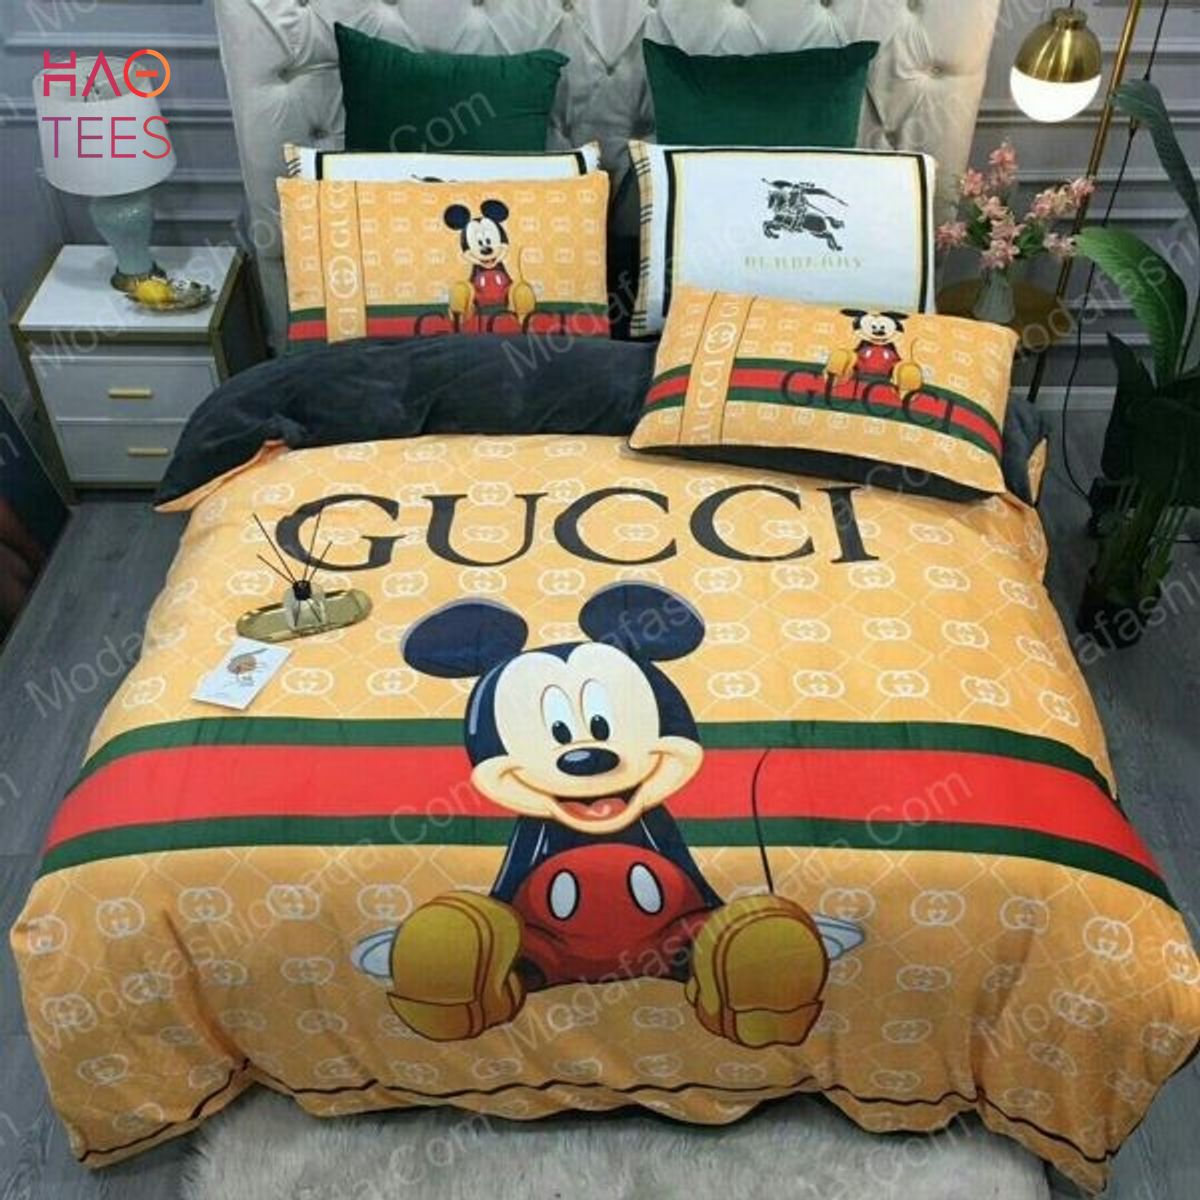 Disney Mickey Mouse Louis Vuitton Quilt Bedding Set - LIMITED EDITION